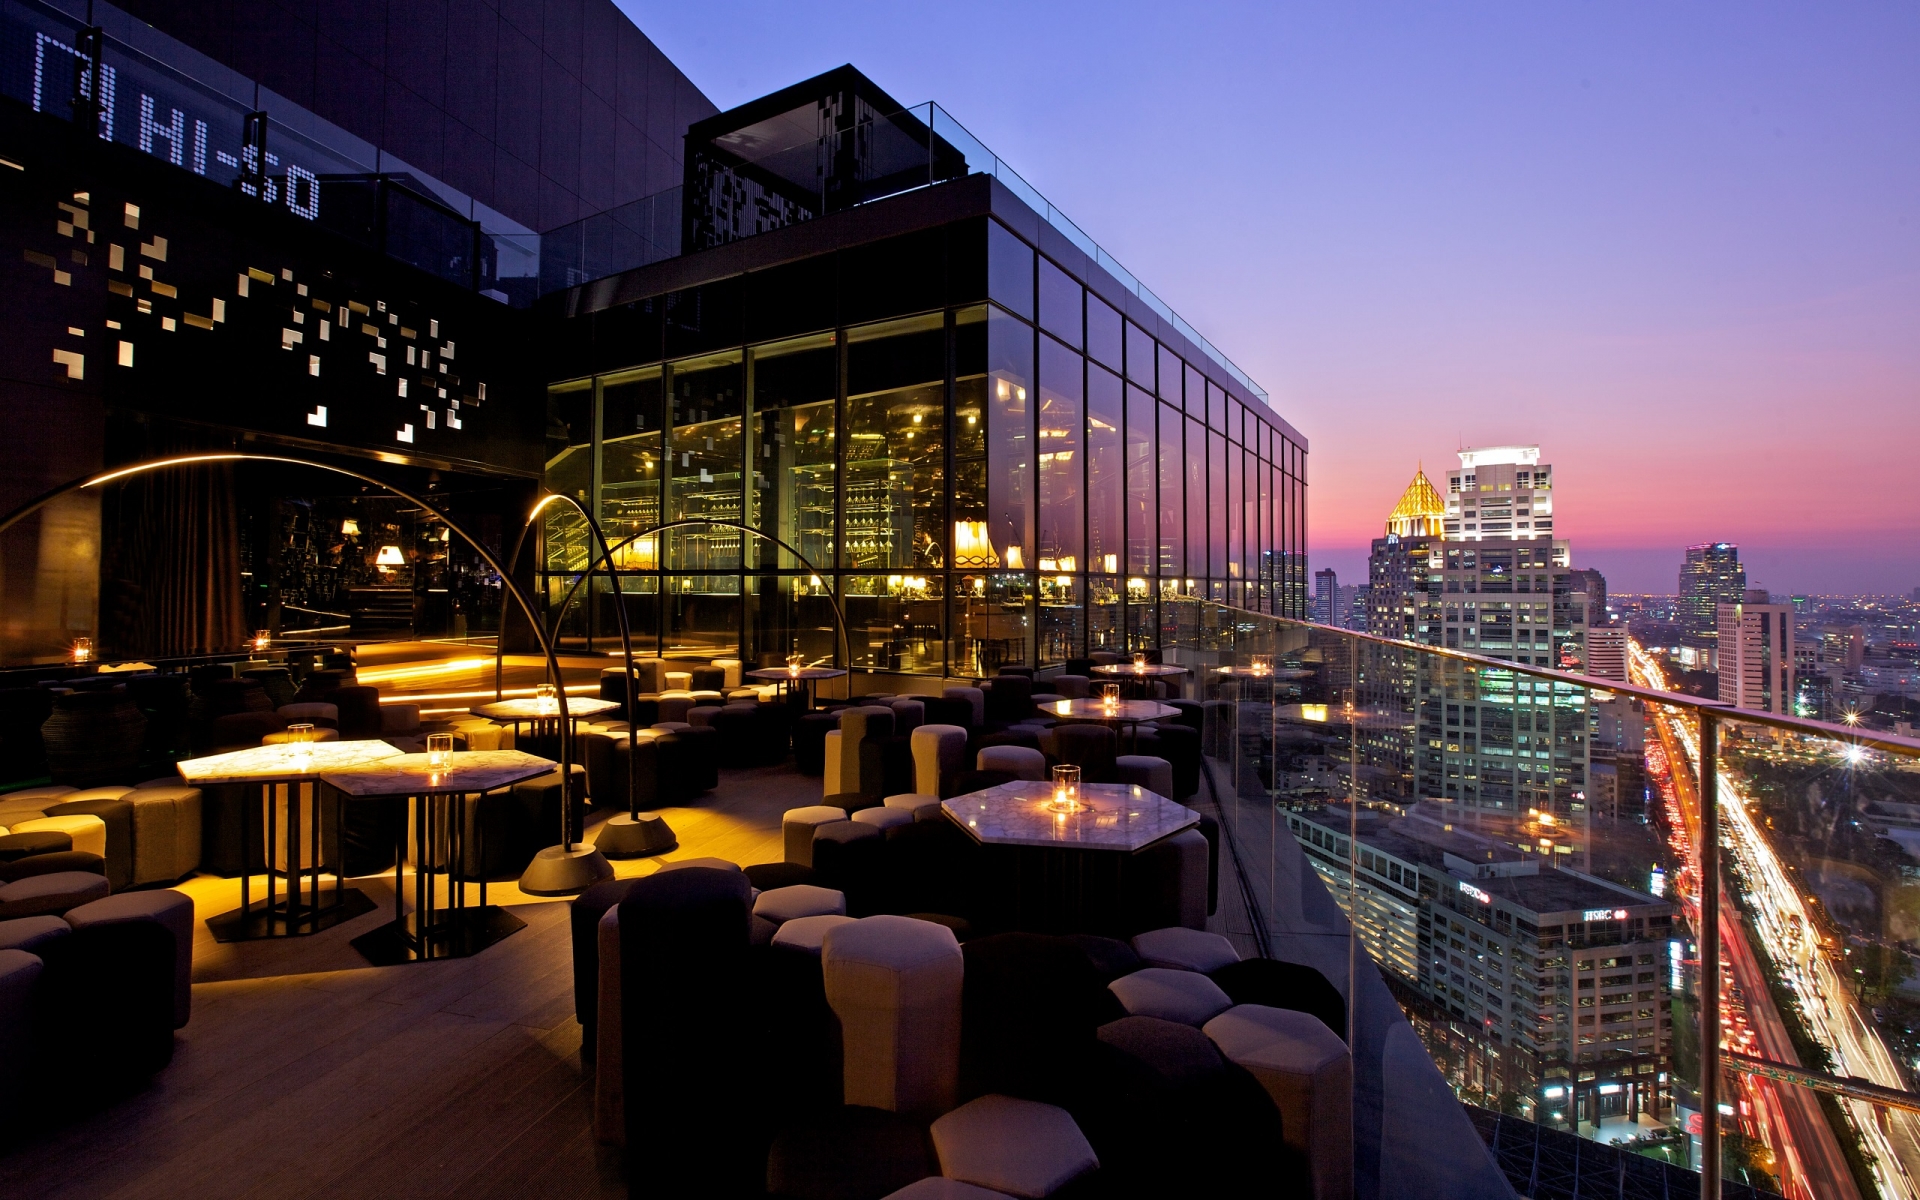 Sofitel SO Bangkok offers several choices for restaurants and bars within the hotel.